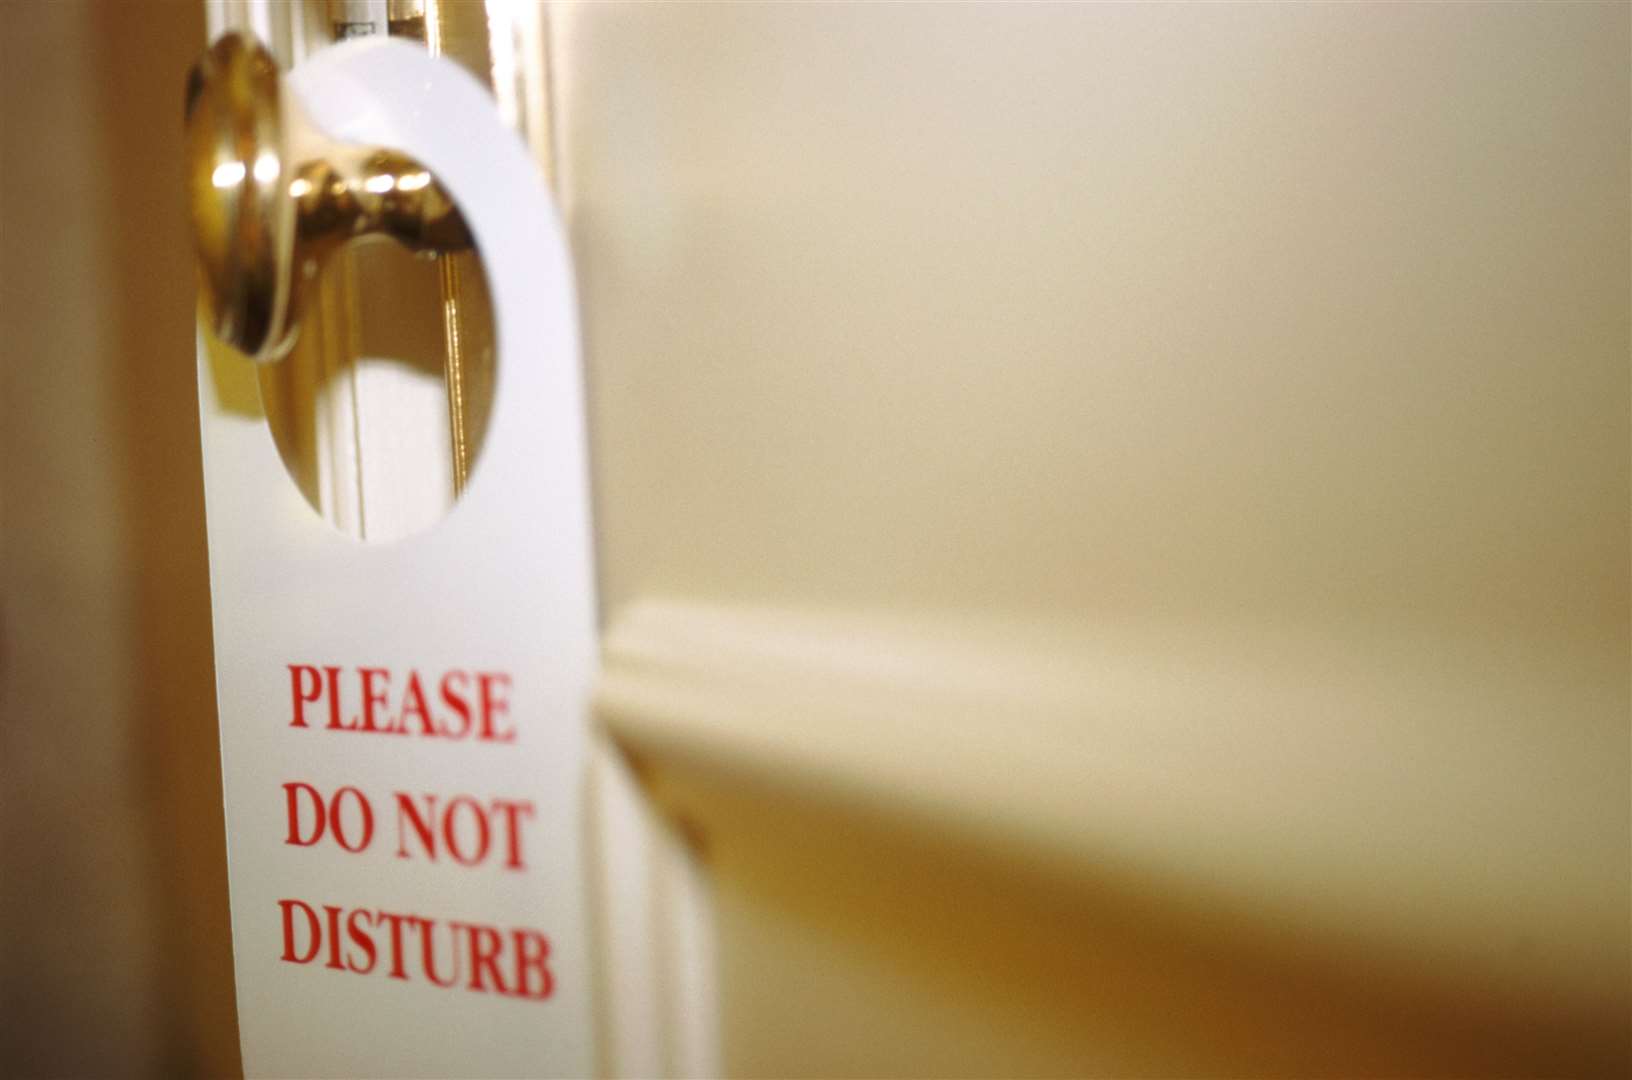 Hotels in the county have been booked up by the Home Office - but they put pressure on local services. Picture: Getty Images/John Foxx/iStockphoto